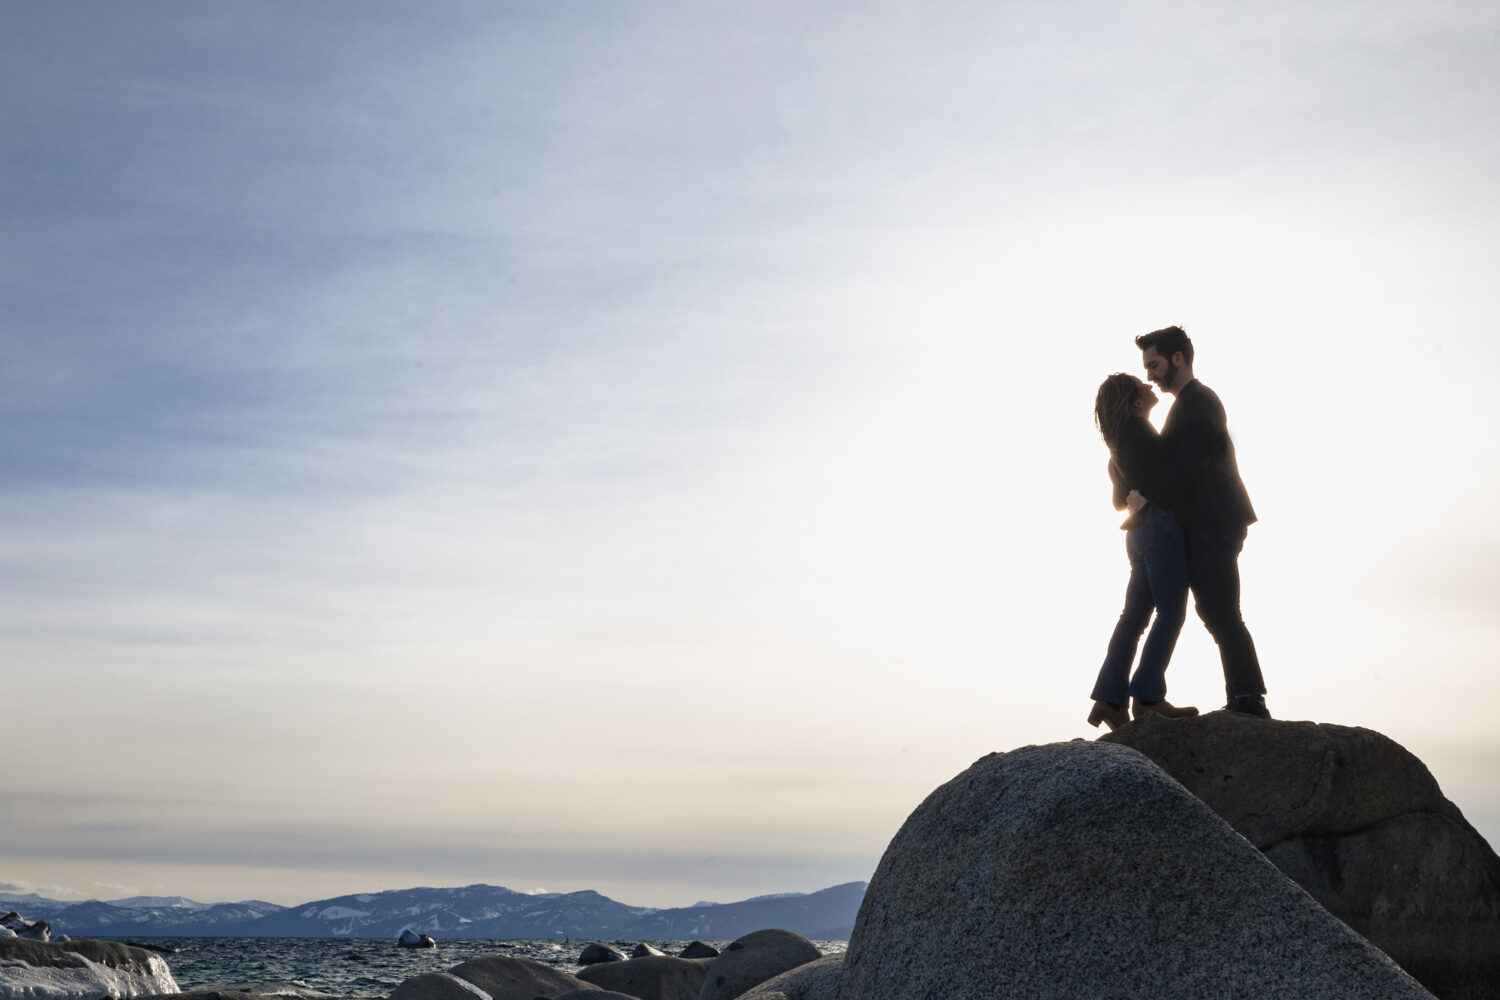 Tahoe engagement shoot by the lake with granite rocks.